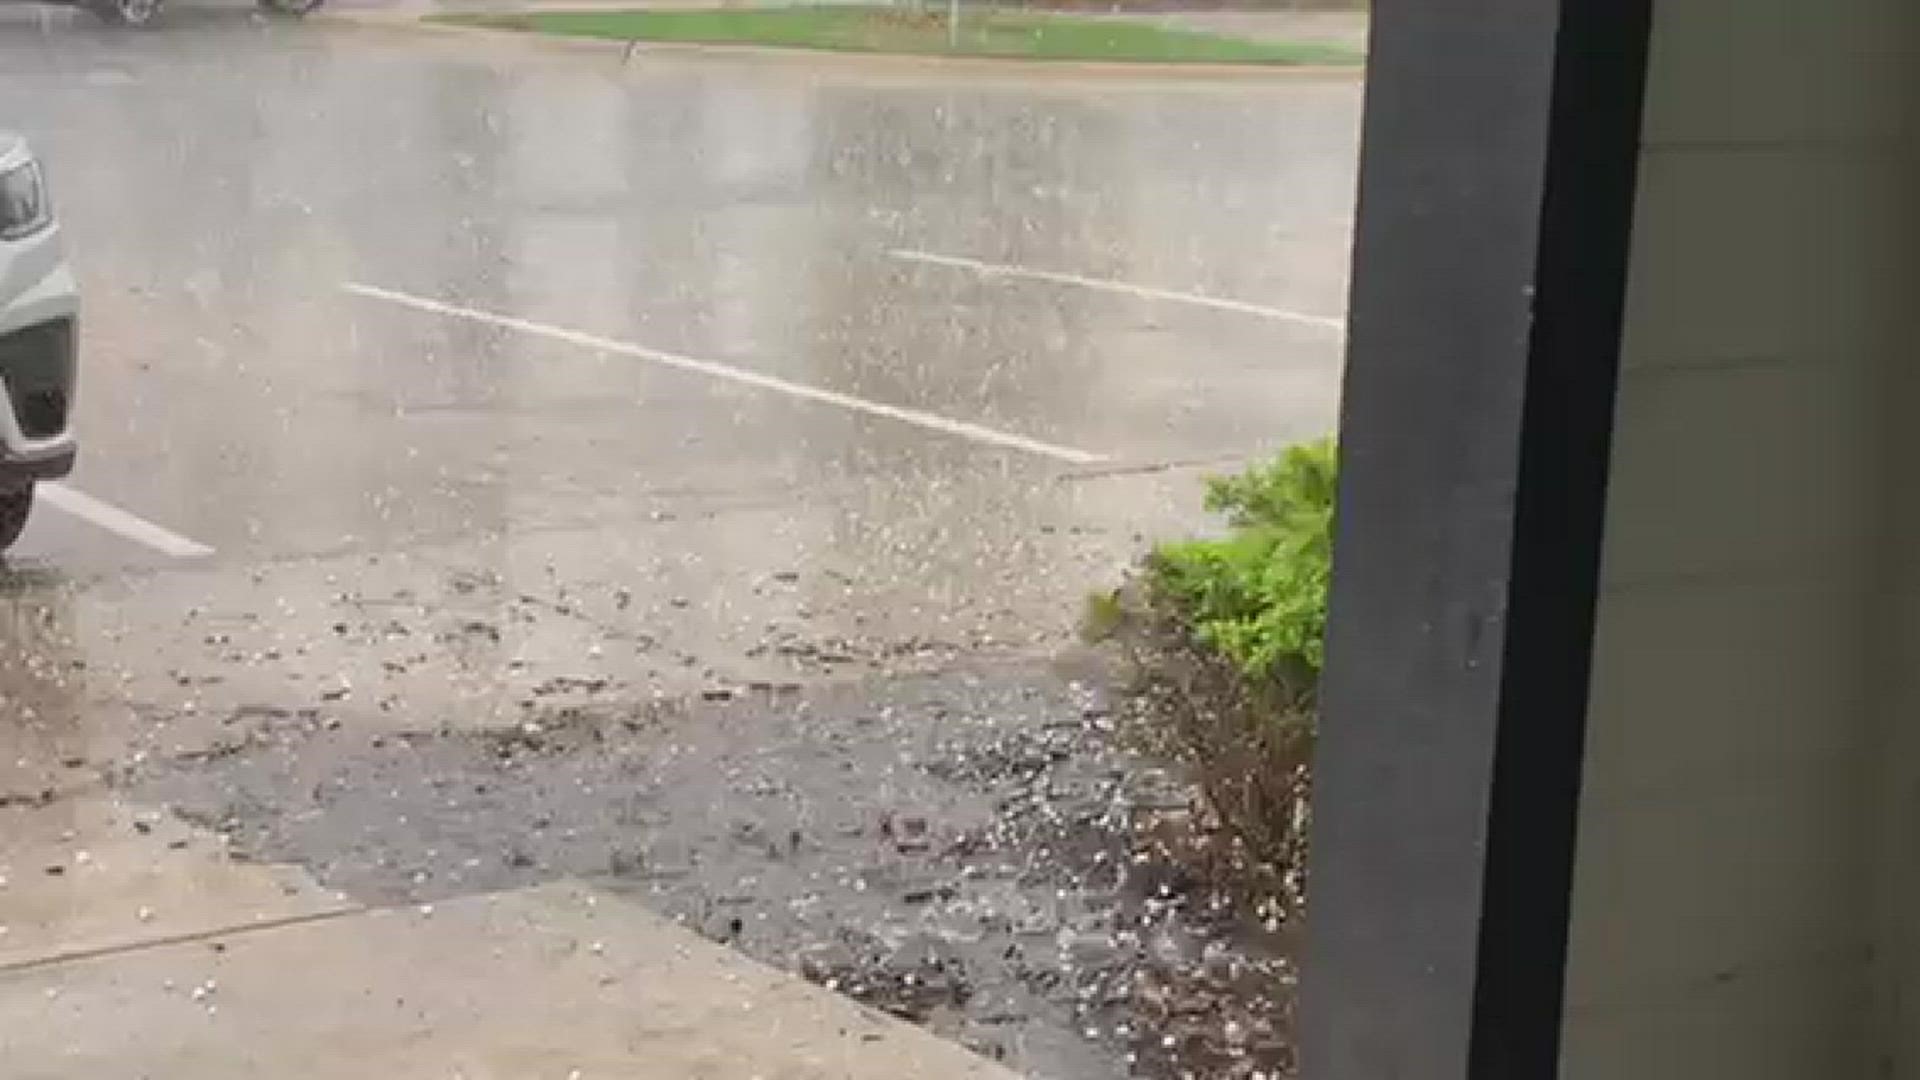 KENS 5 Photojournalist Mike Vigil captured video of small hail coming down in the Alamo City as storms move through town.